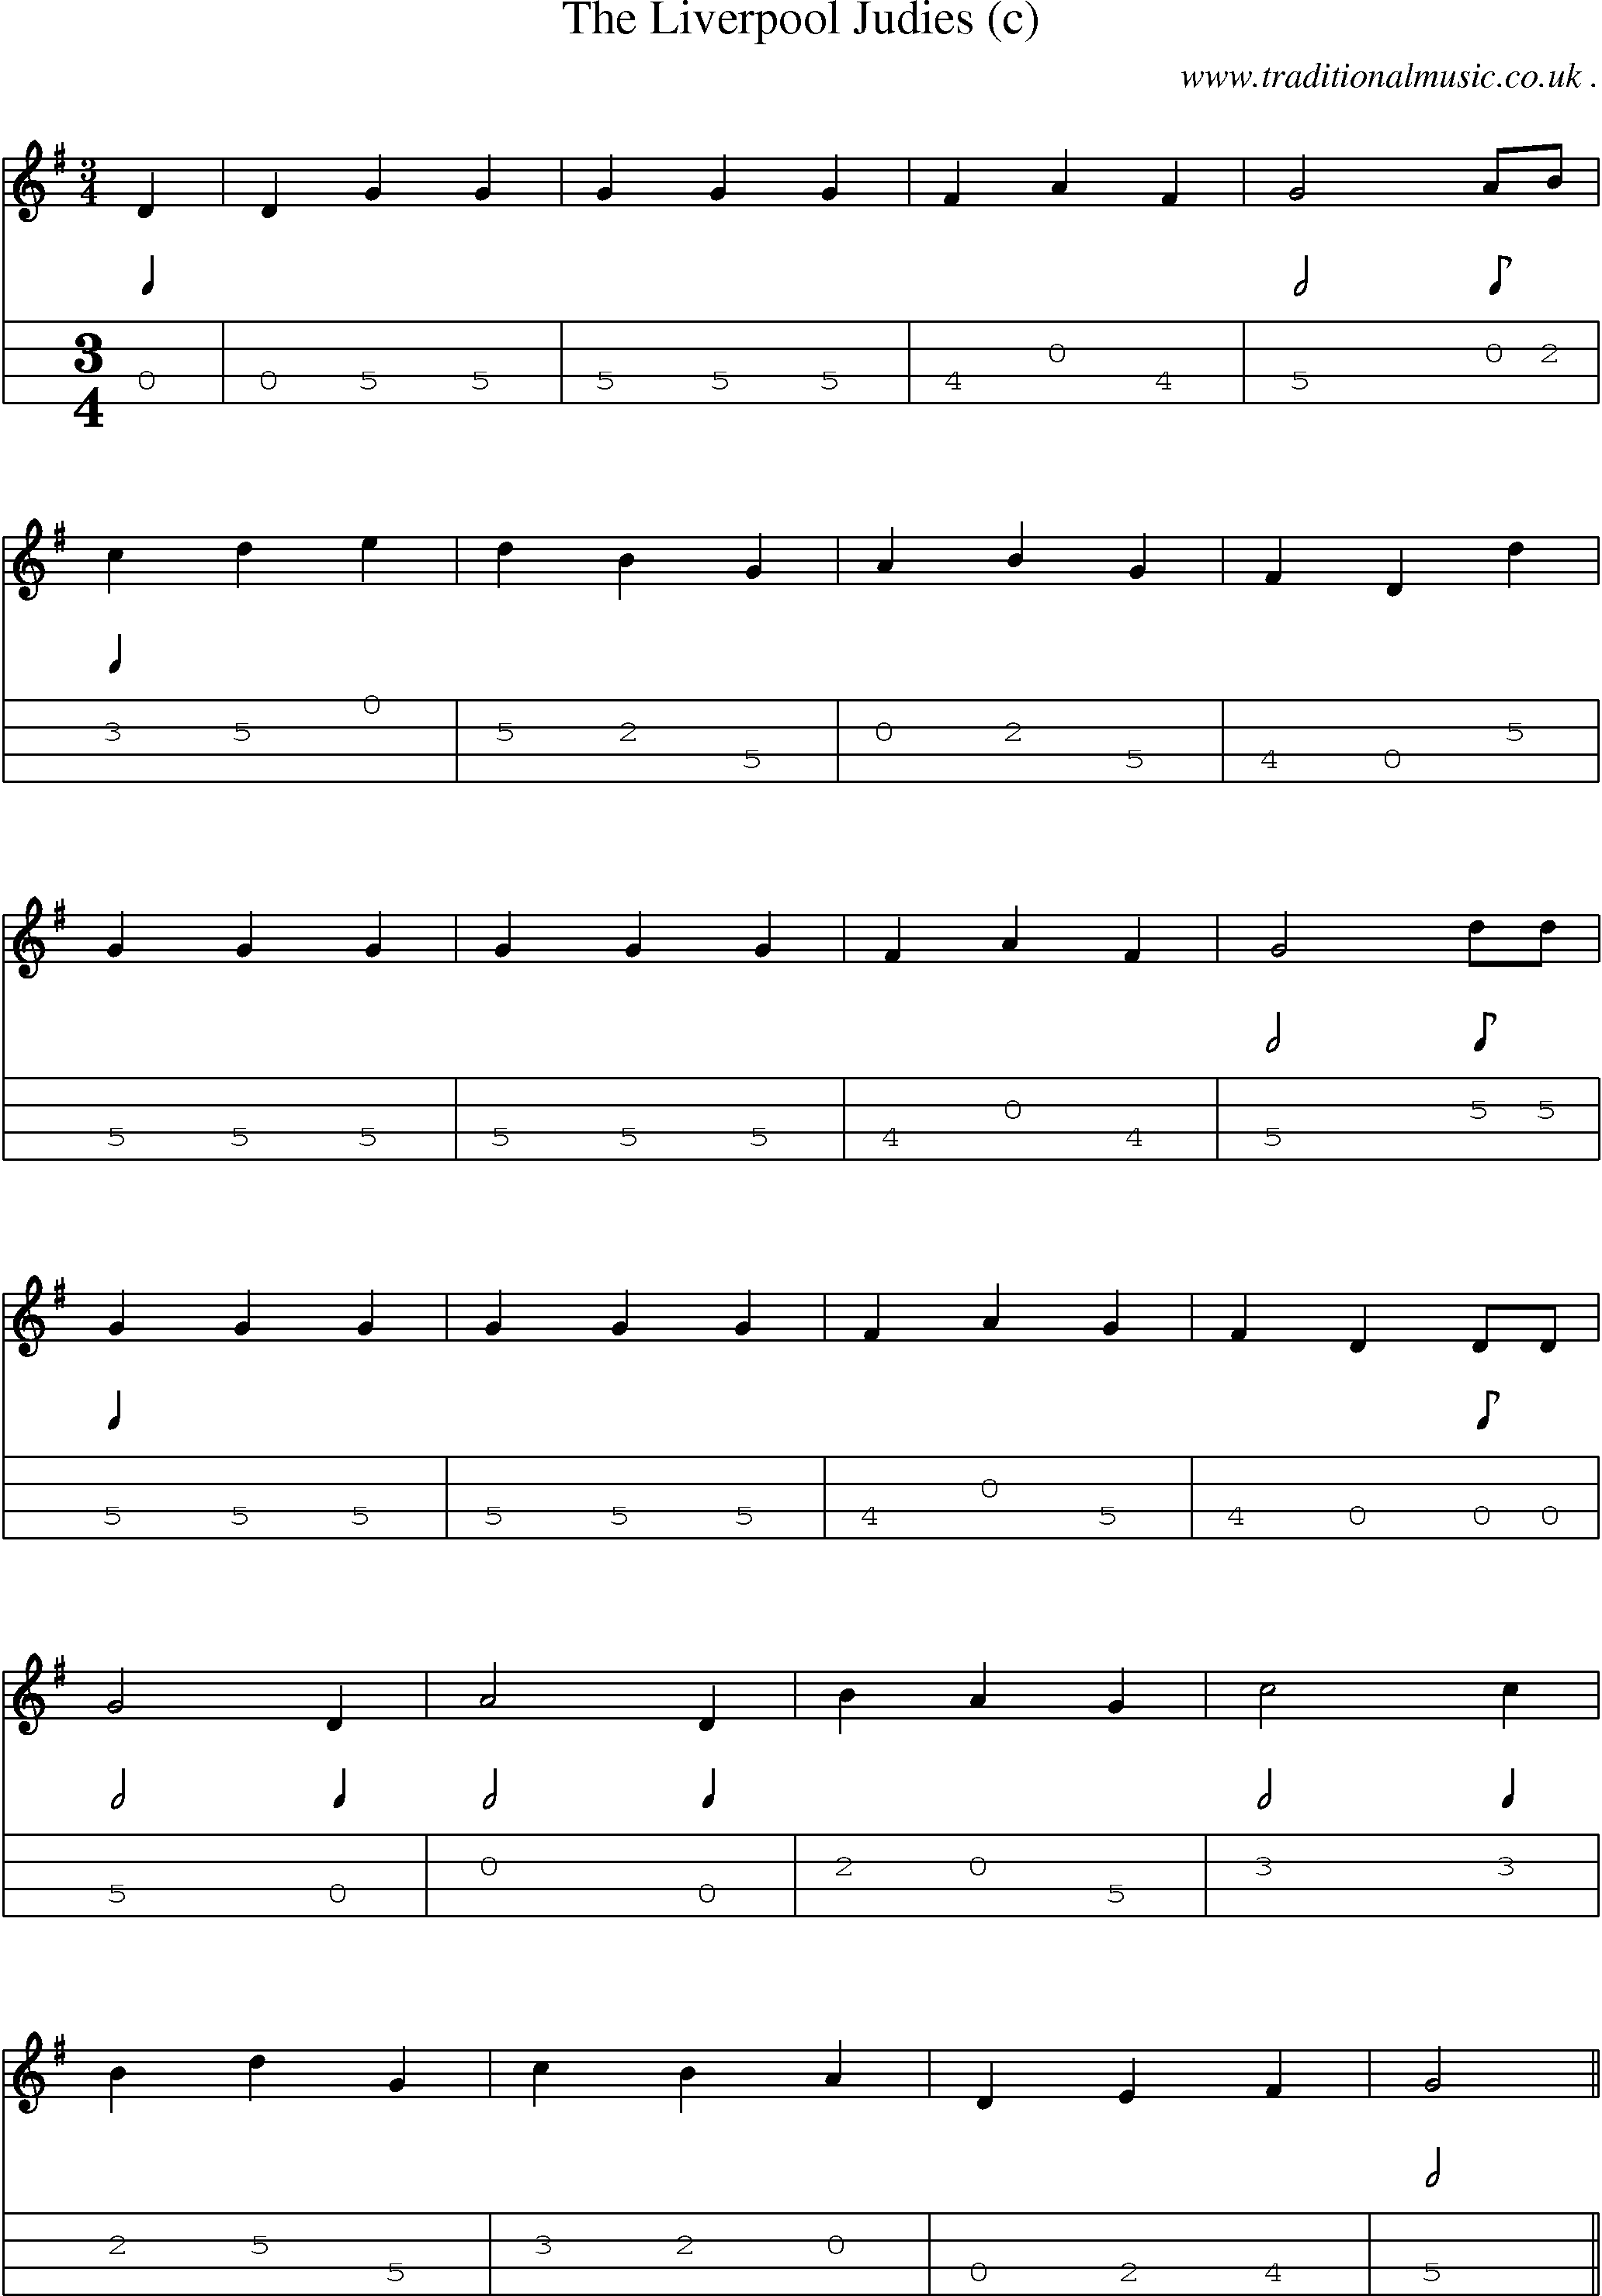 Sheet-Music and Mandolin Tabs for The Liverpool Judies (c)